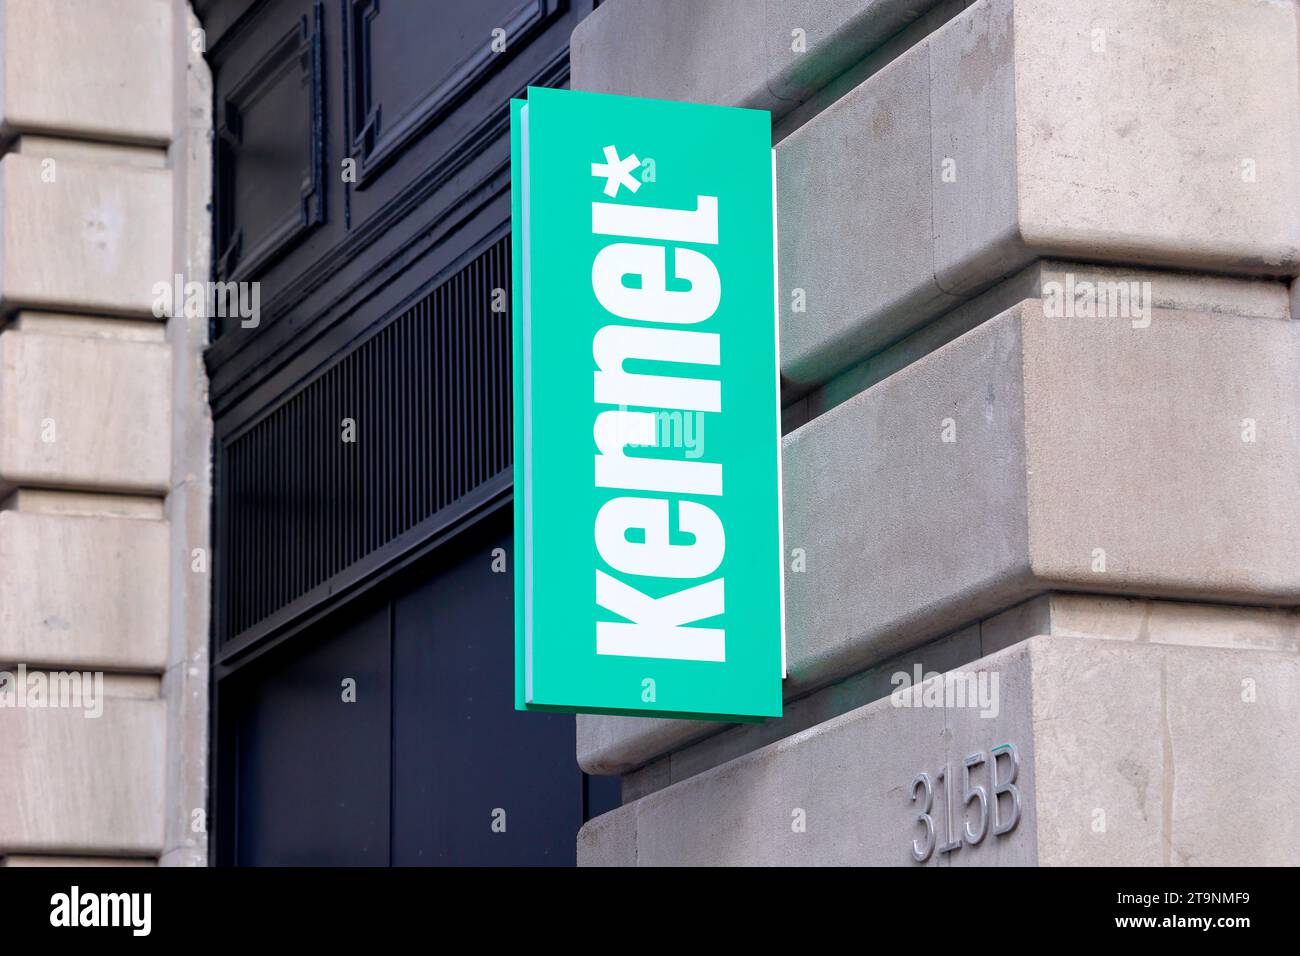 Signage for Kernel fast casual vegetarian semi automated restaurant in Manhattan, New York. The restaurant is by Chipotle founder & ex CEO Steve Ells. Stock Photo